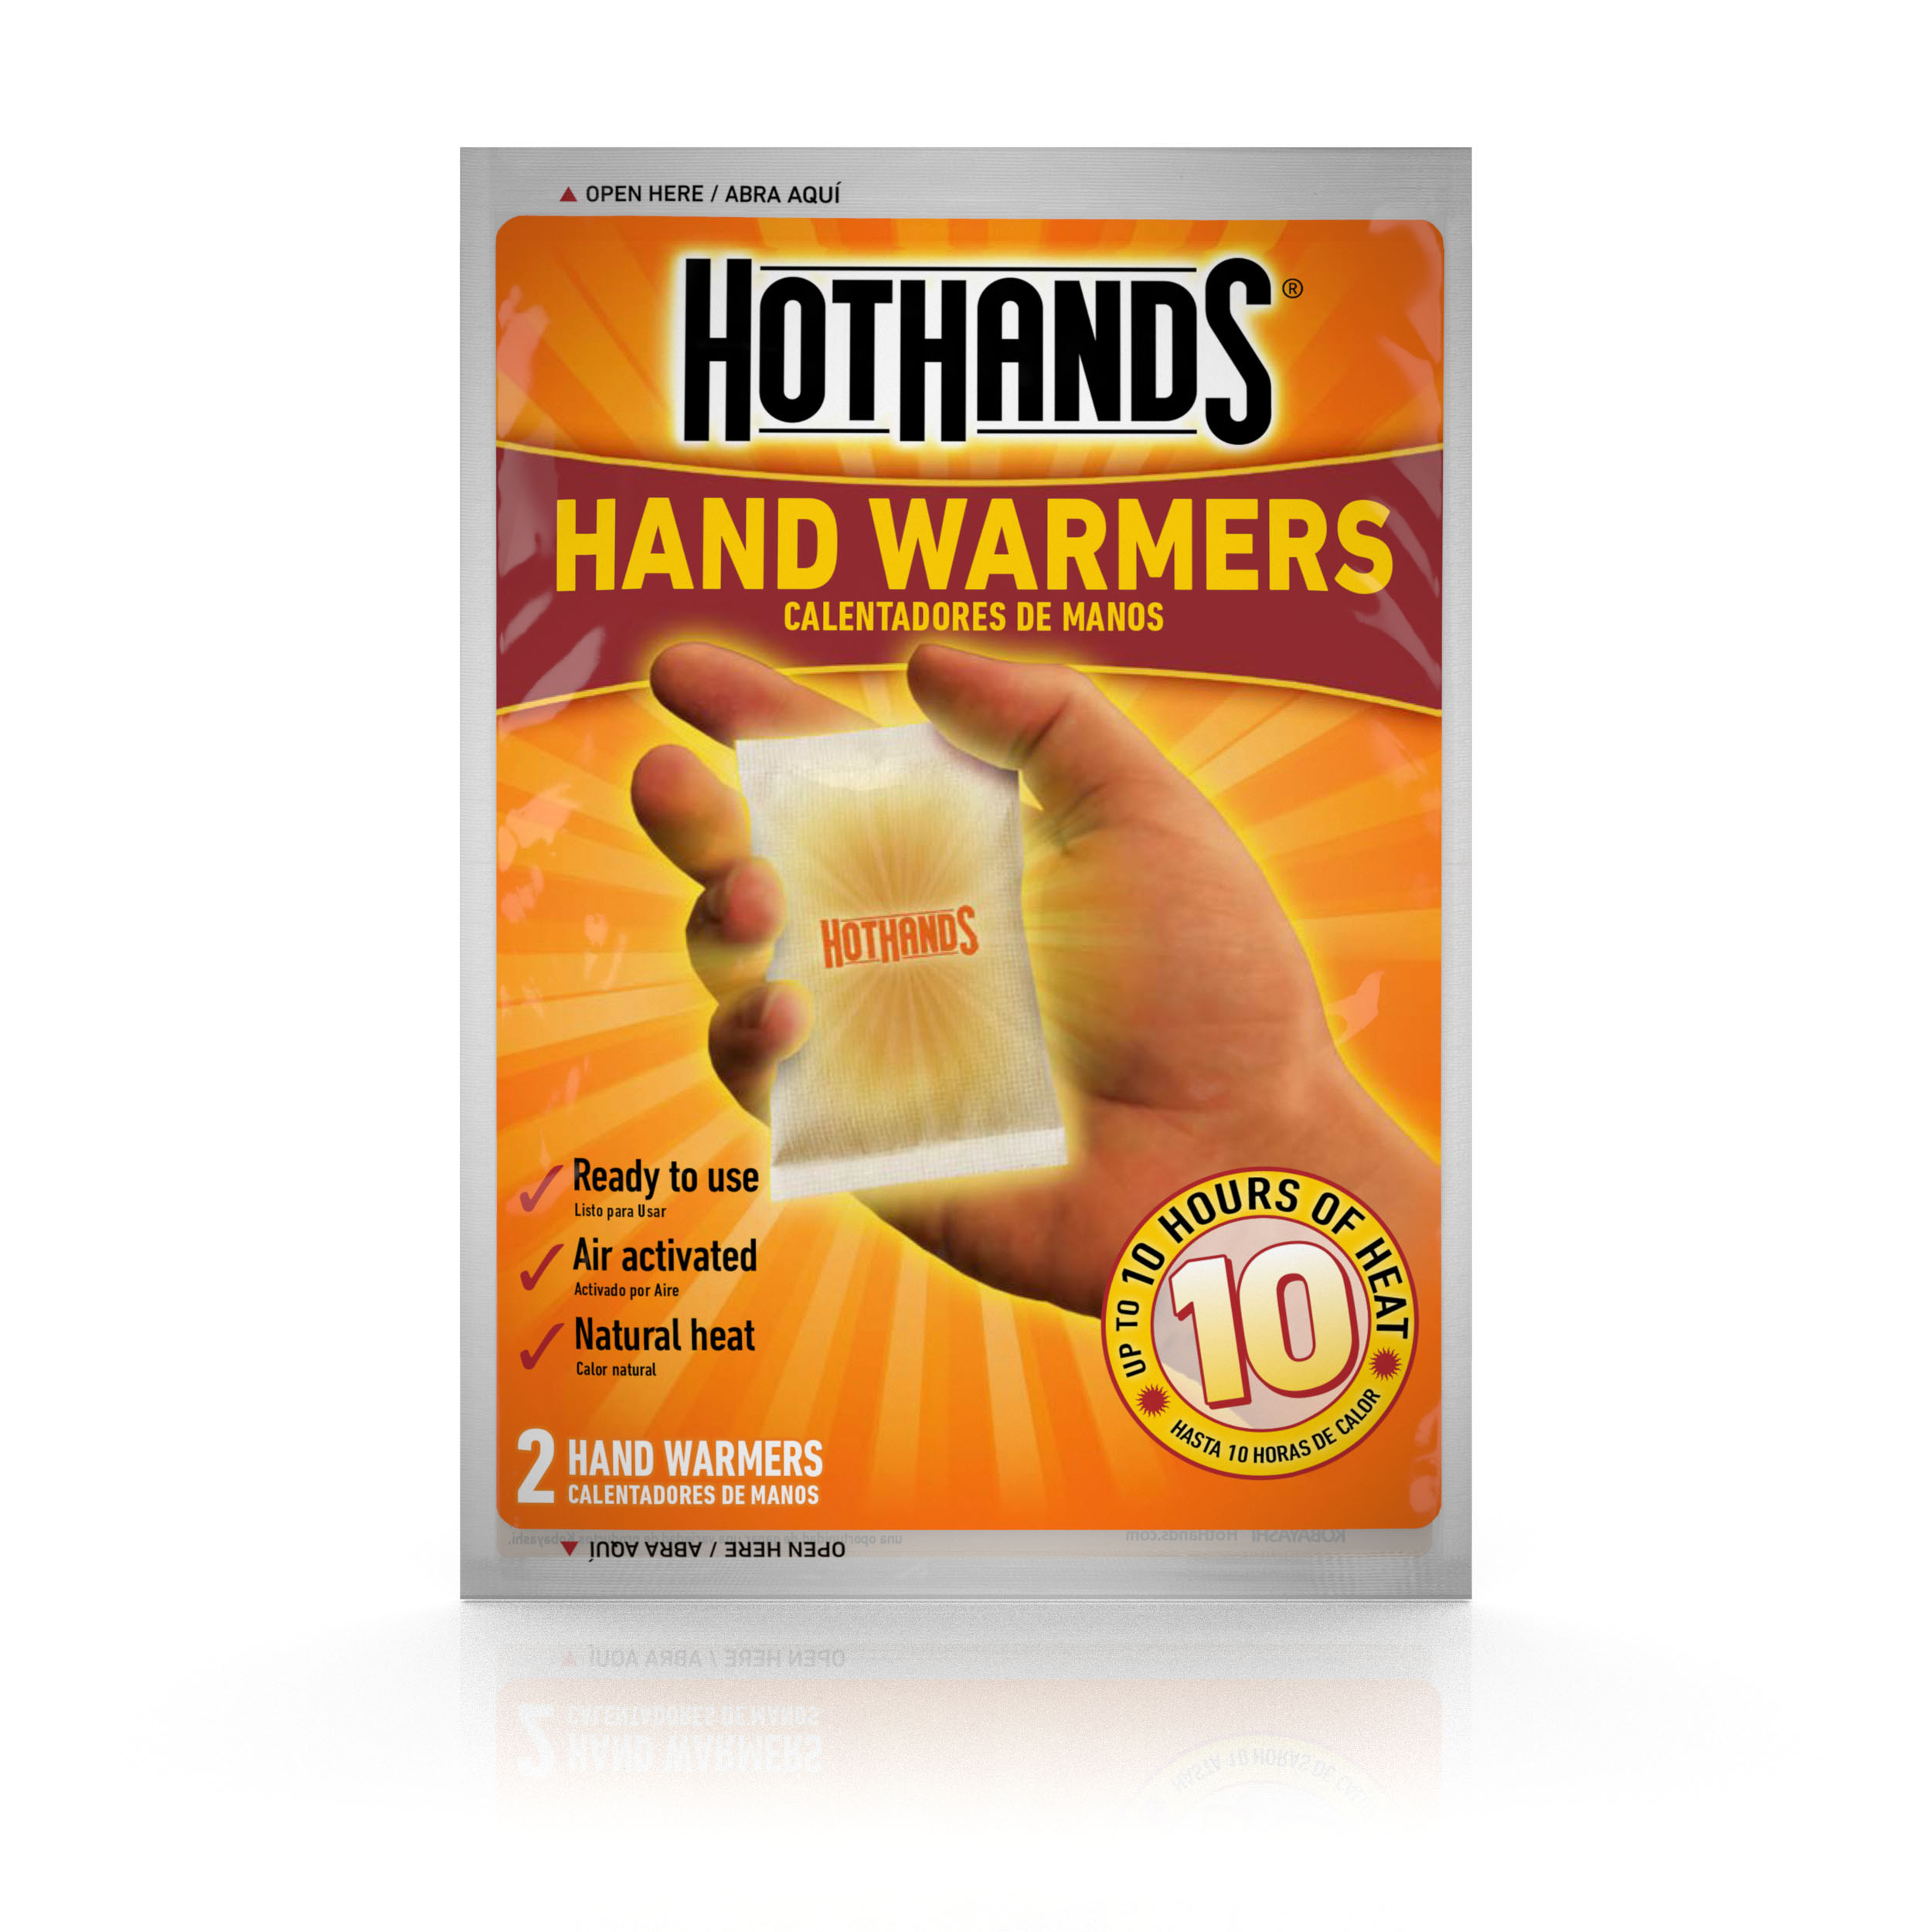 HotHands Hand Warmers, 1 Pair Pack - image 1 of 6